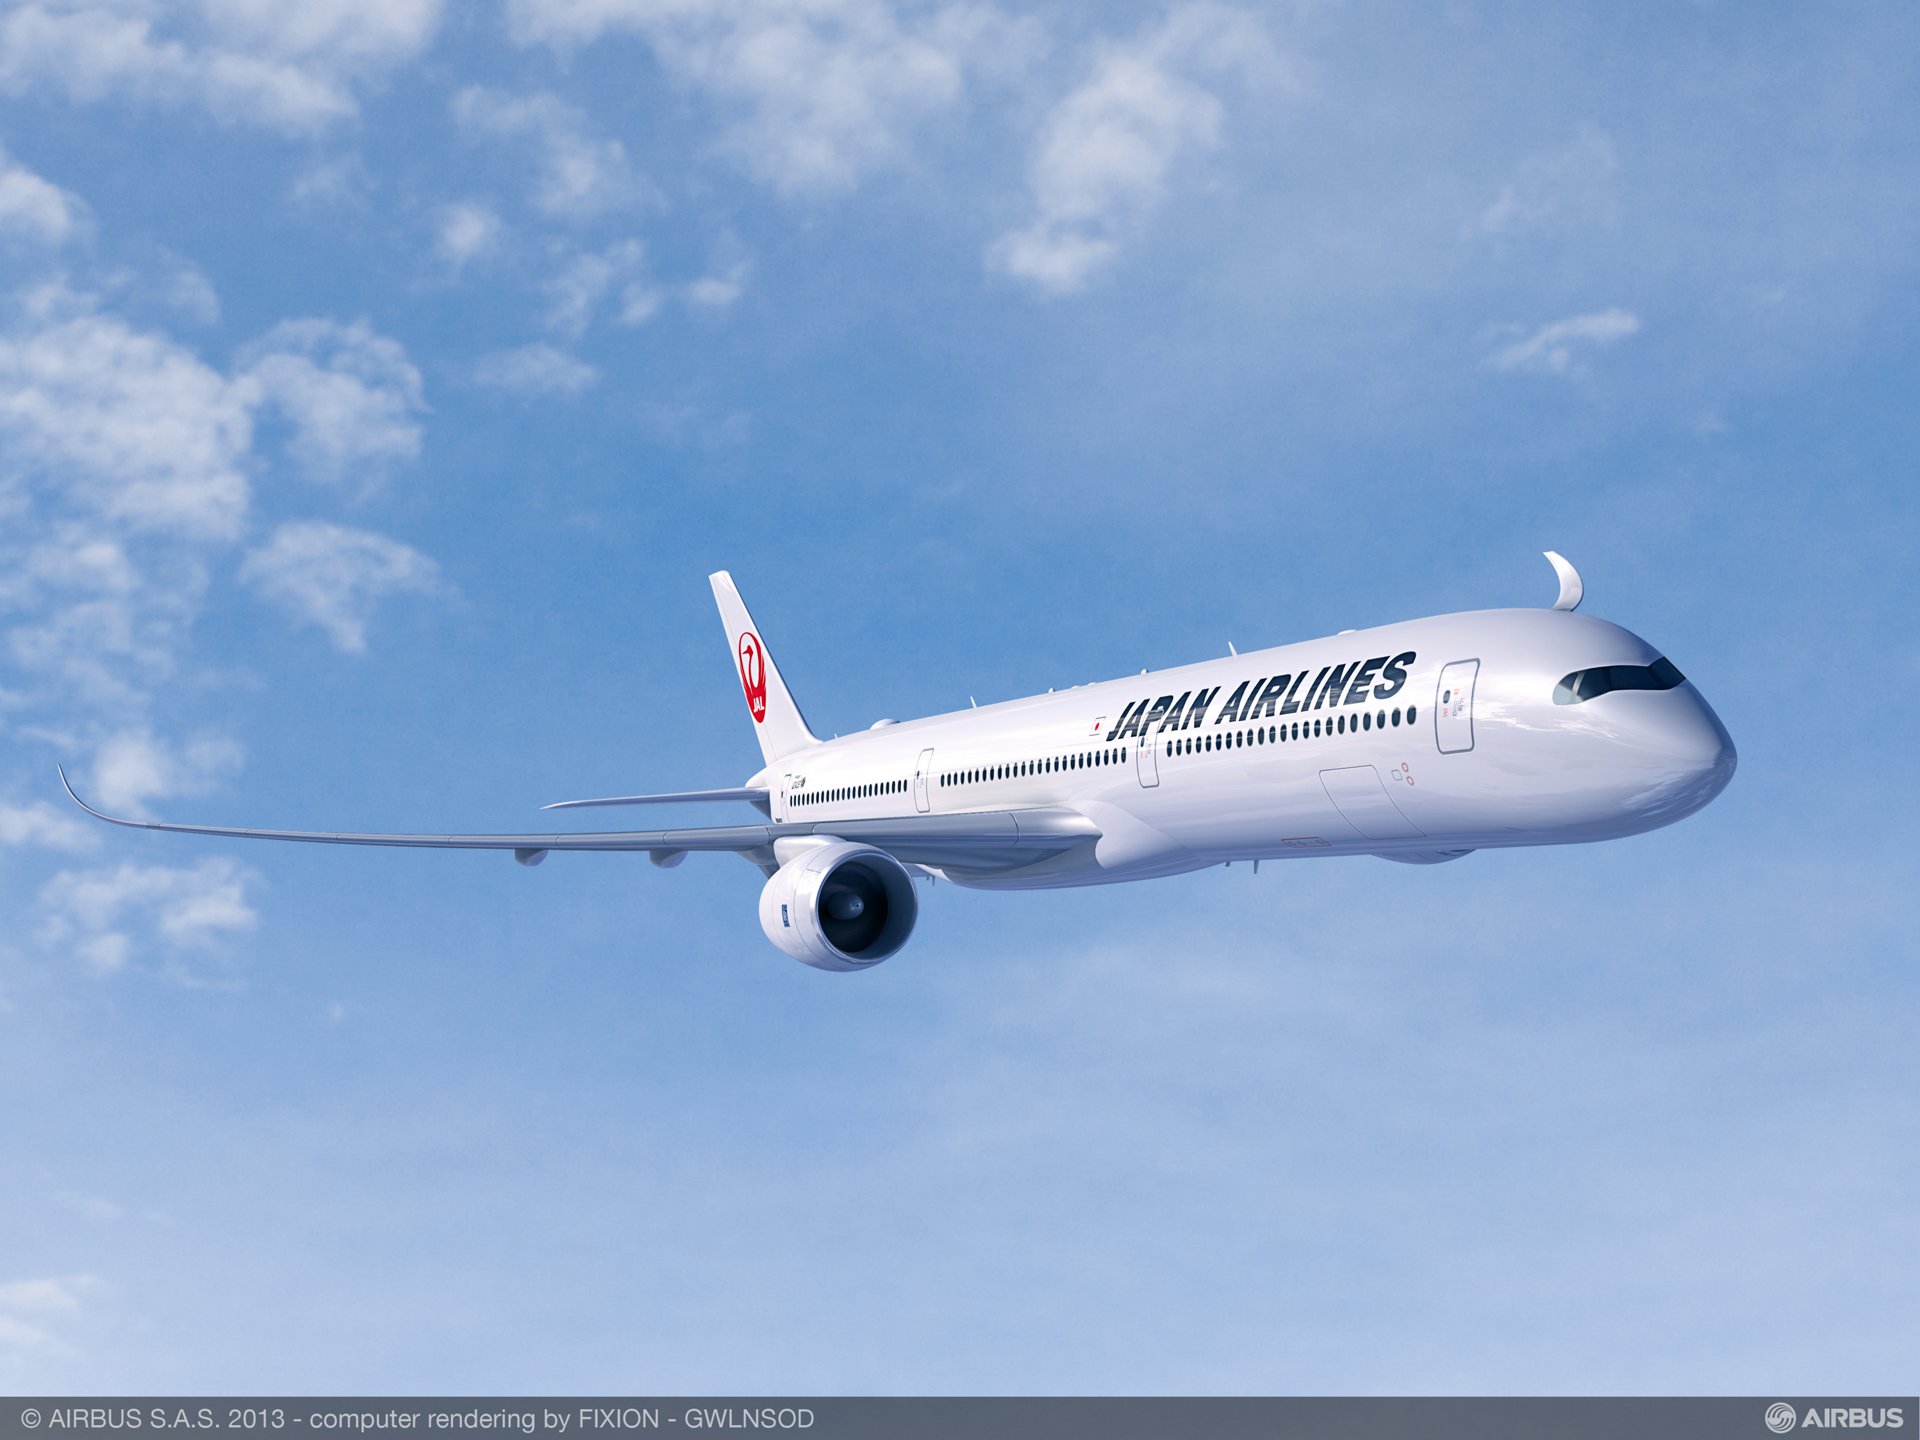 A Strategic A350 Xwb Order From Japan Airlines Expands Airbus